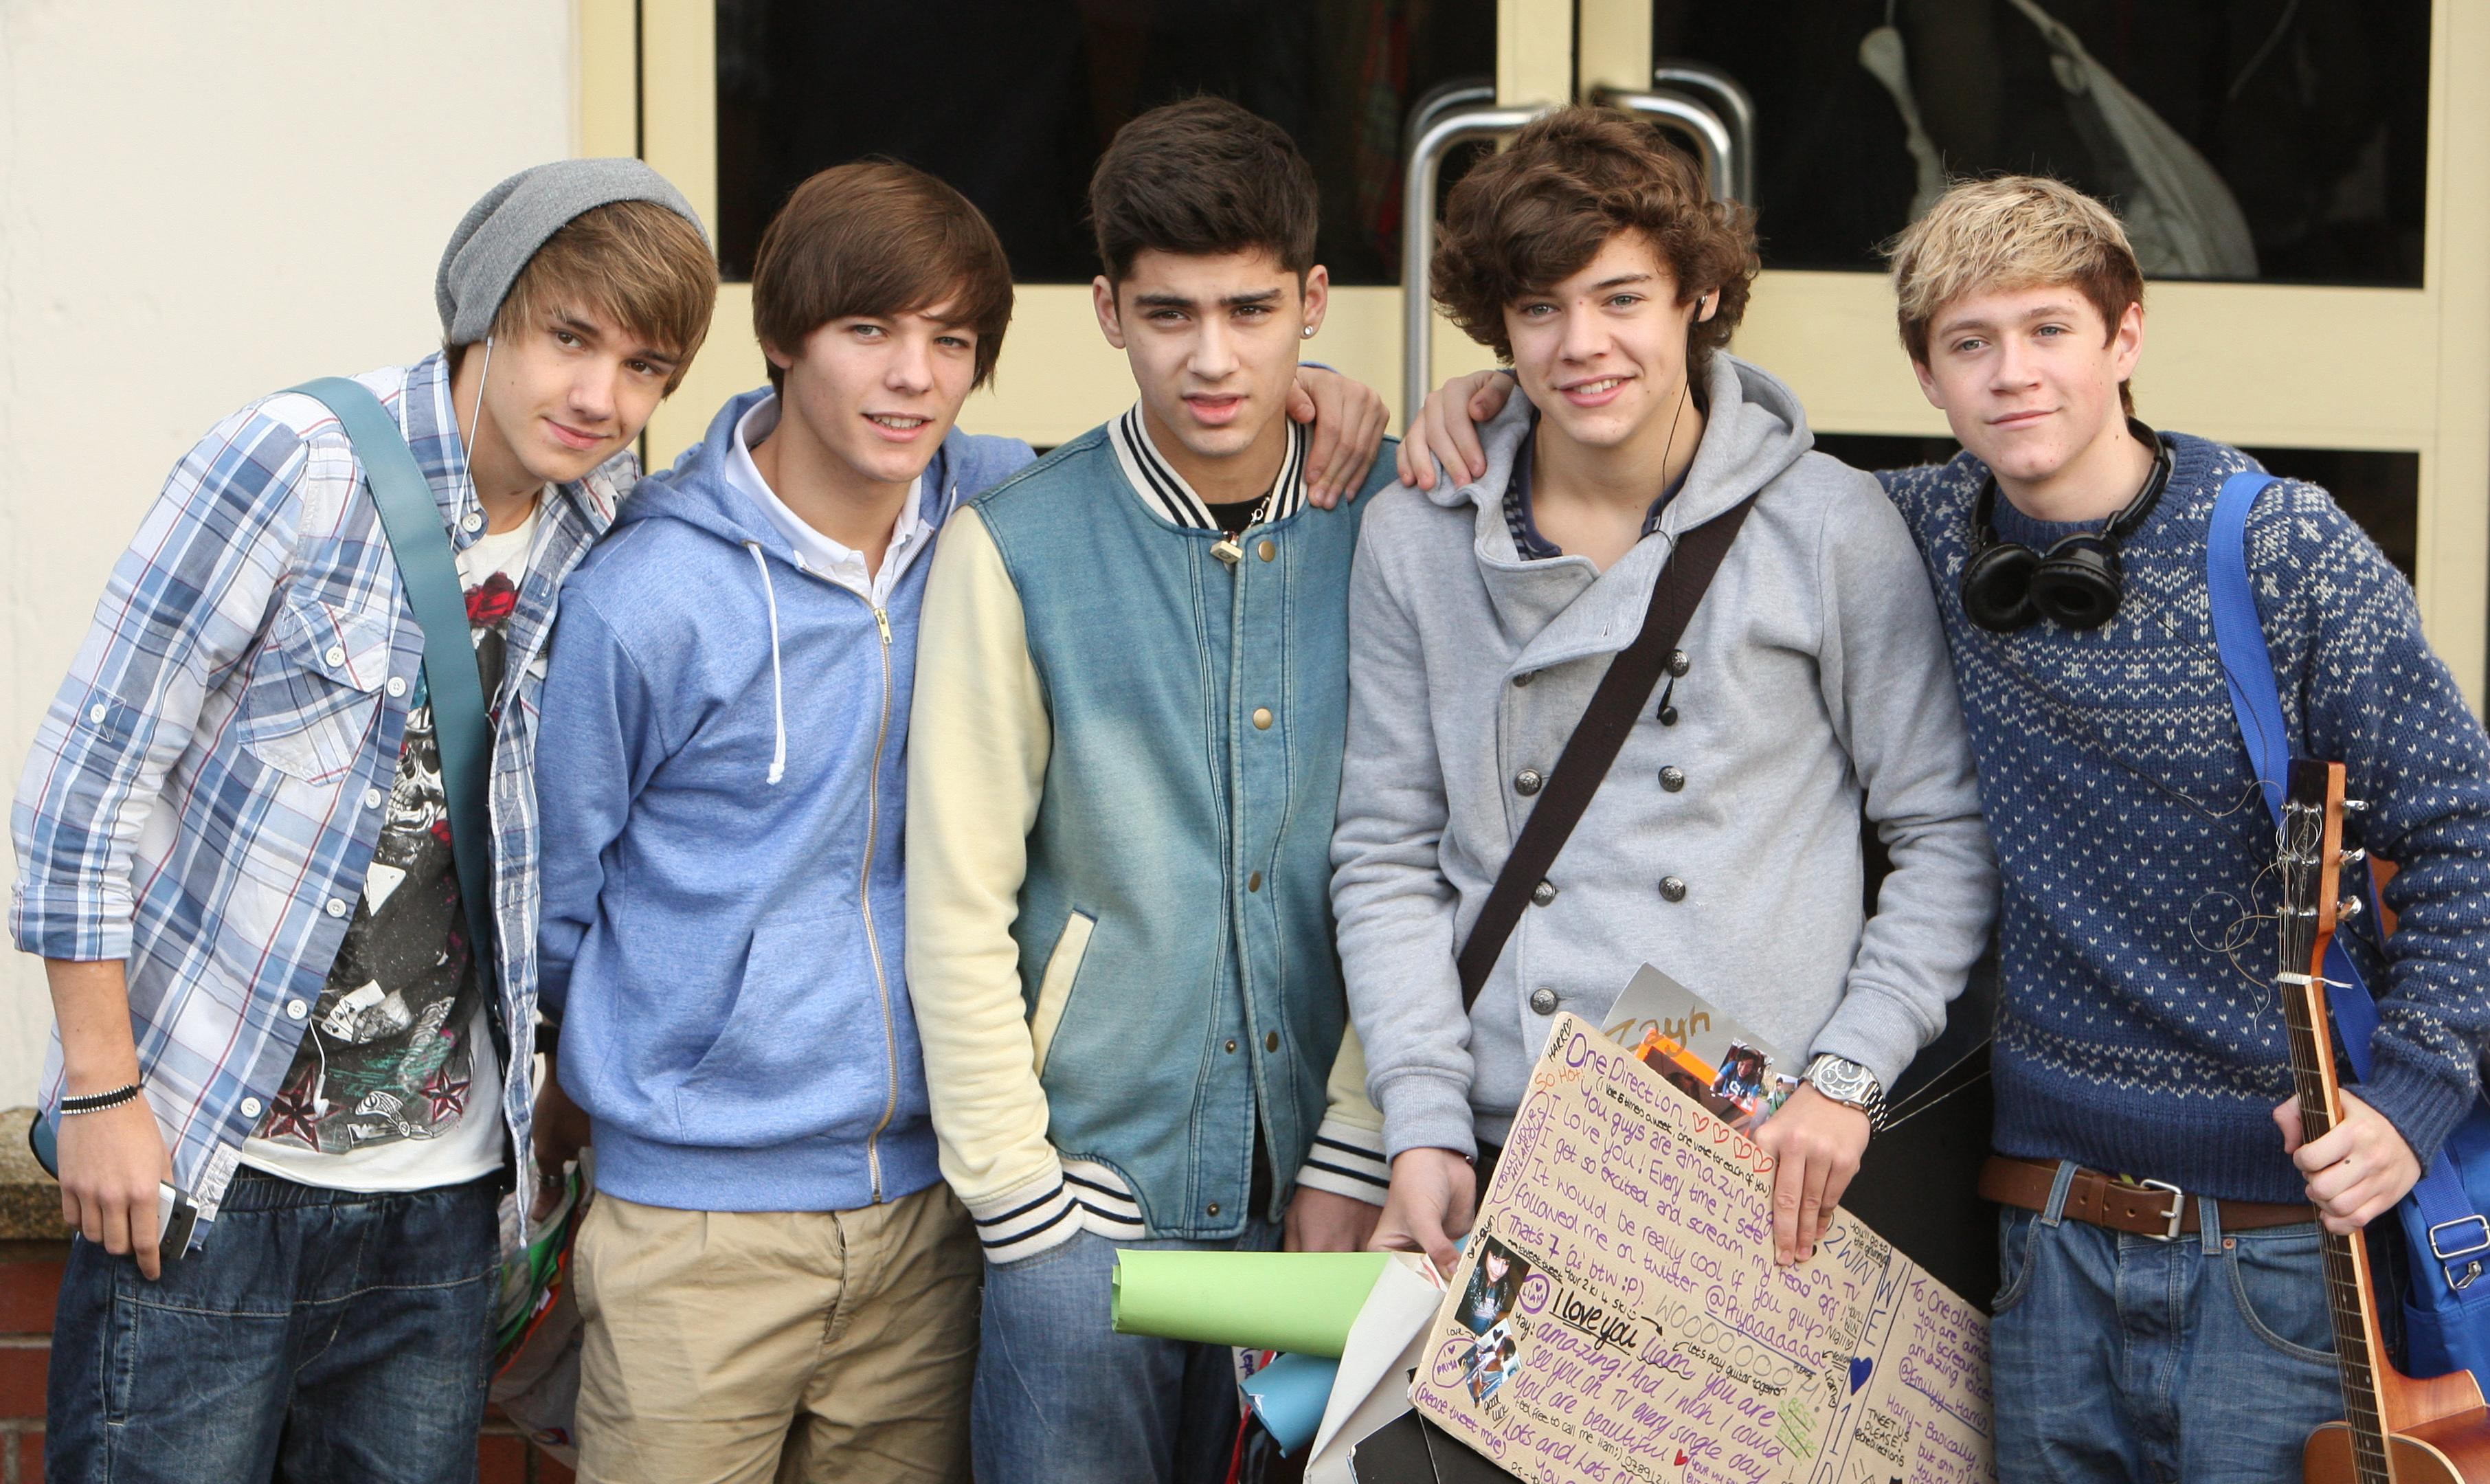 Harry Styles (second from right) with his One Direction bandmates on the X Factor in 2010